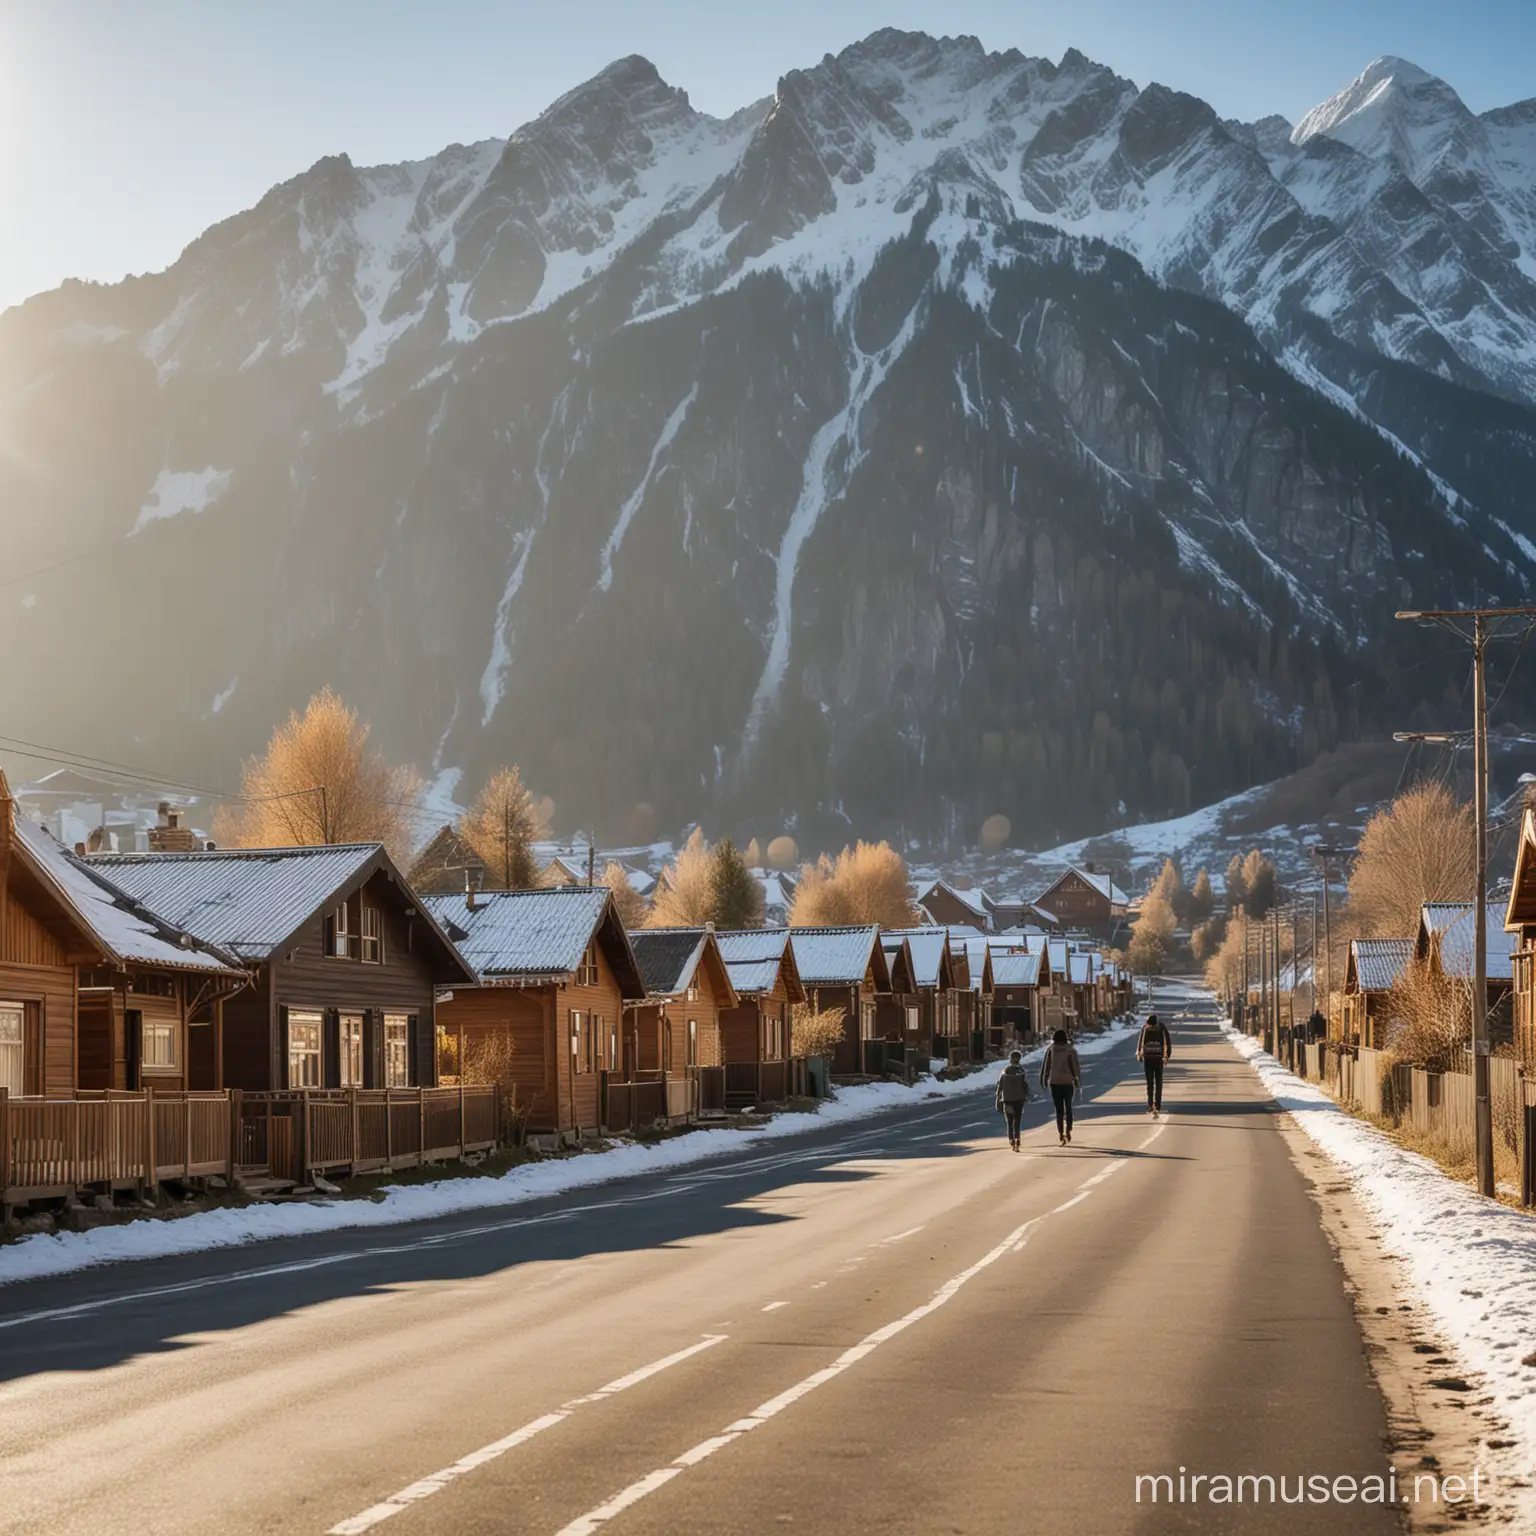 a row of wooden houses line two sides of a street, mountain backdrop, people walking on the road, winter sun shining,